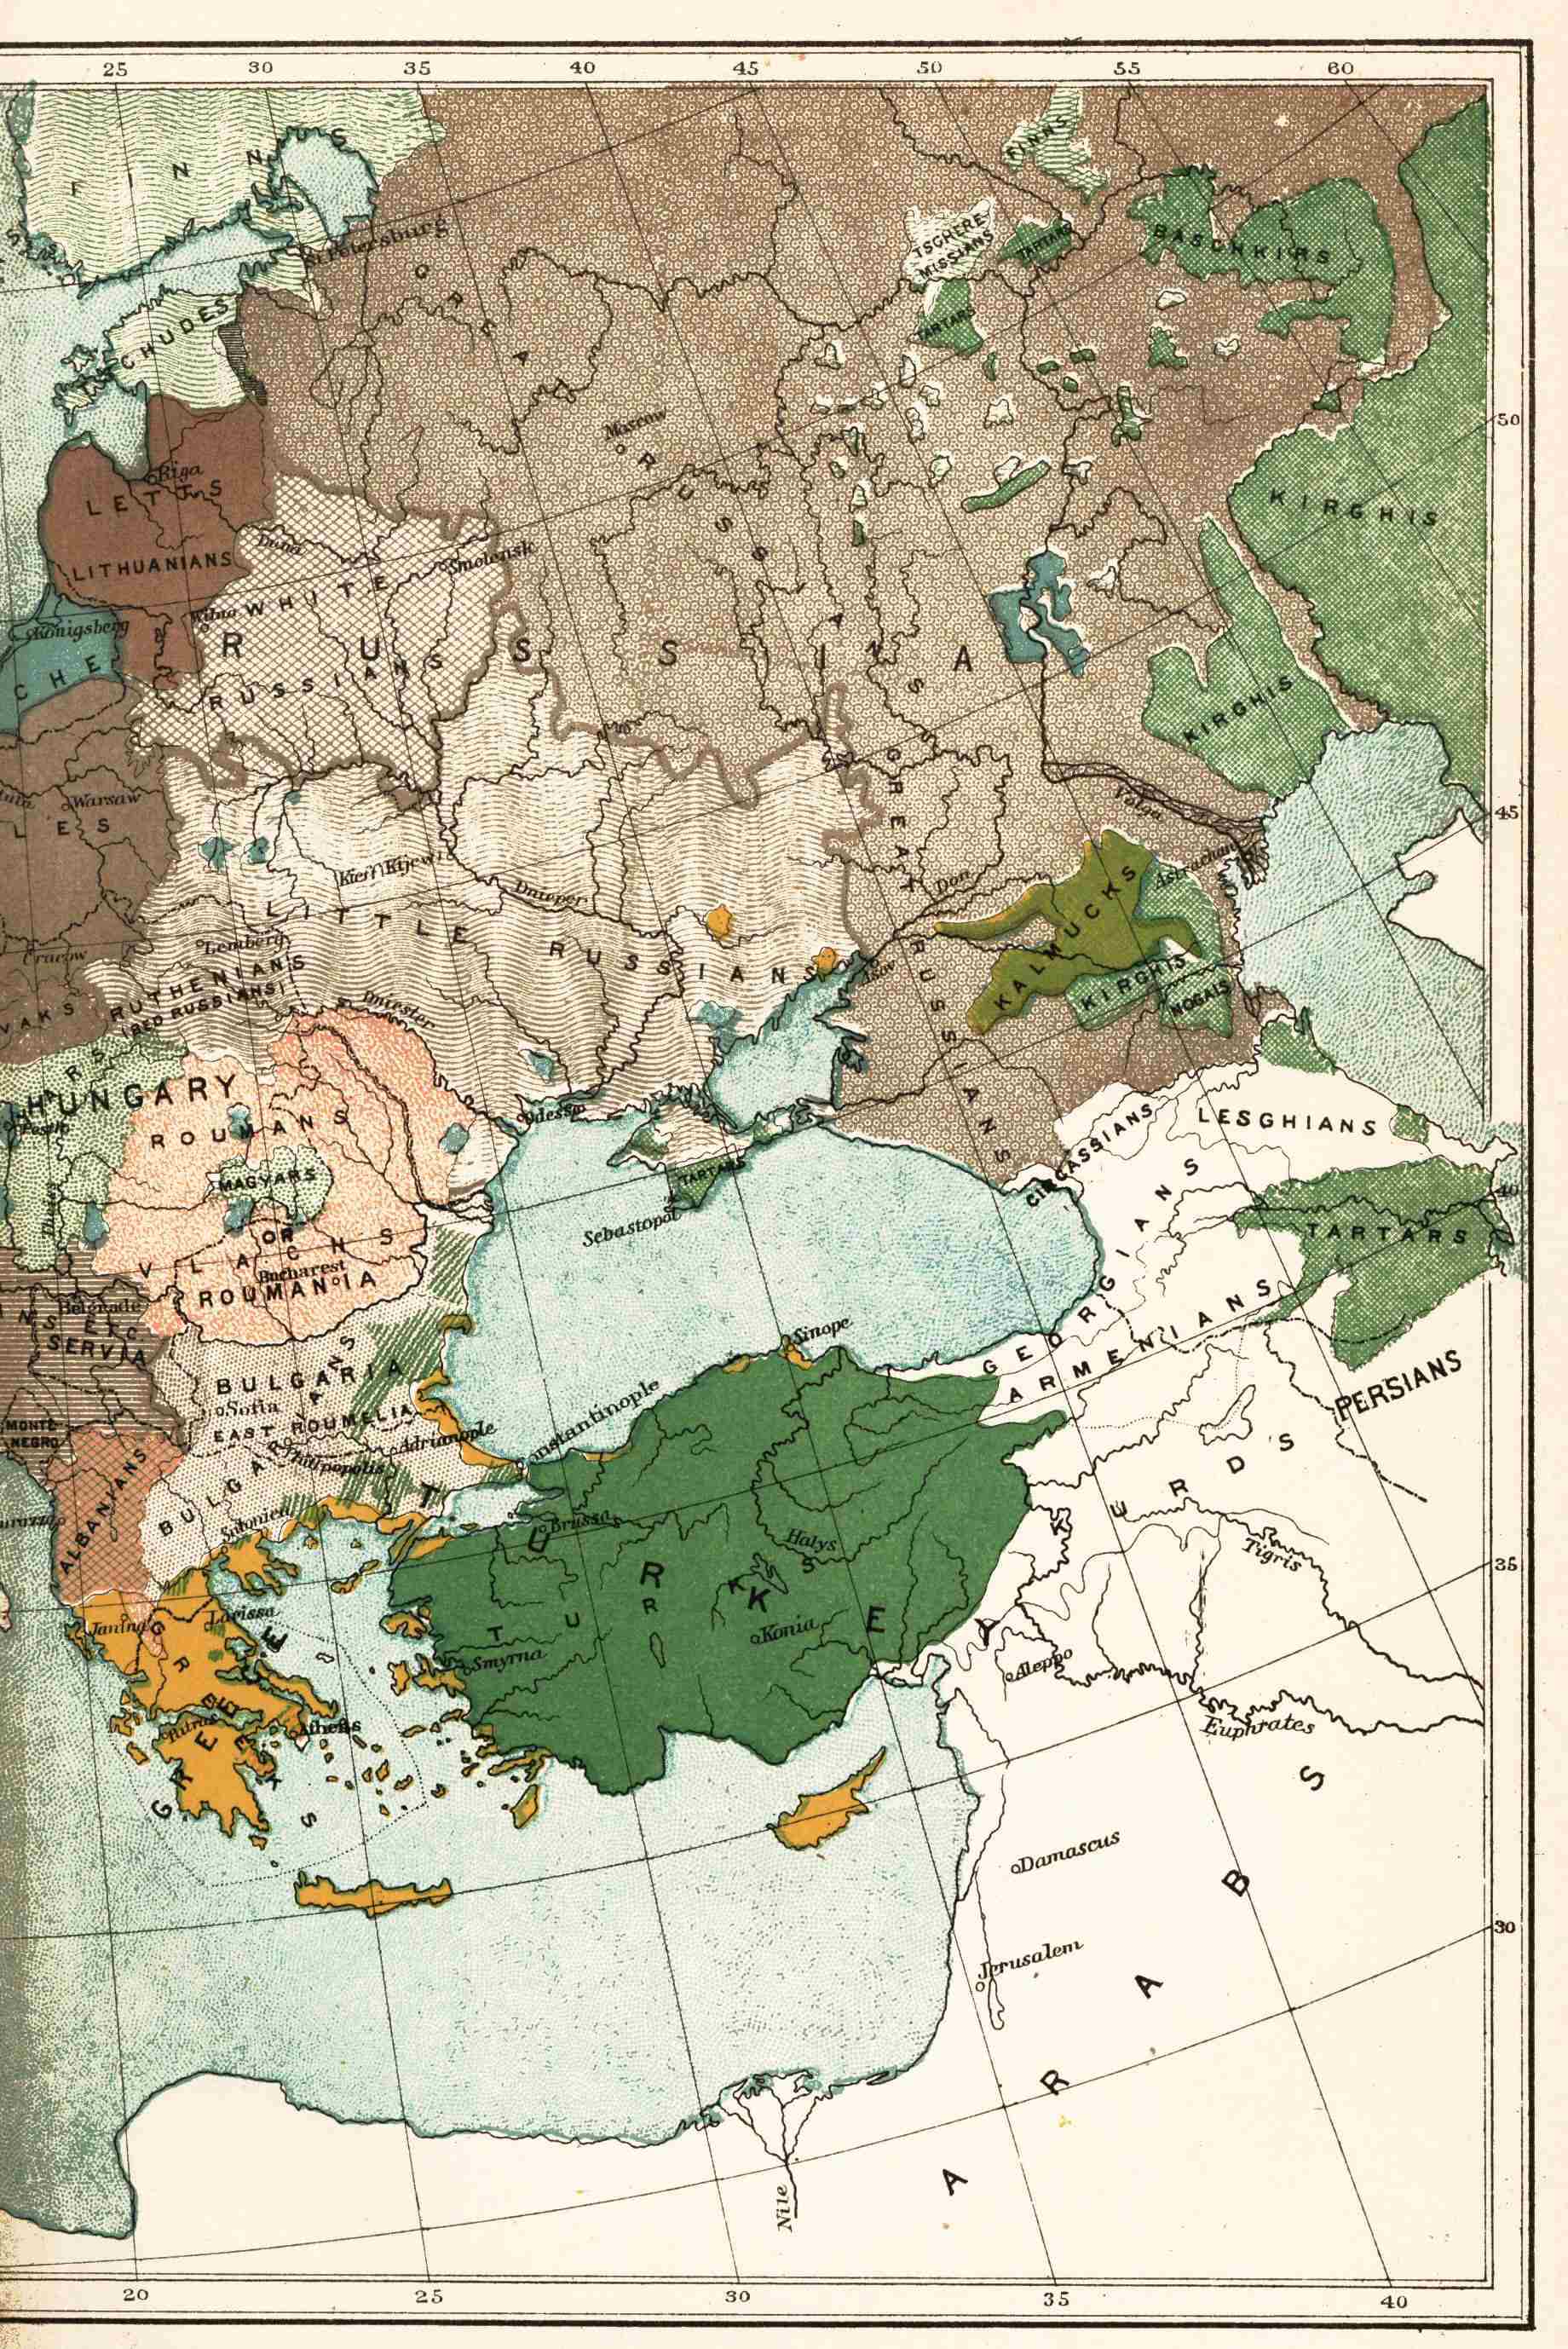 ETHNOLOGICAL MAP OF MODERN EUROPE (right)